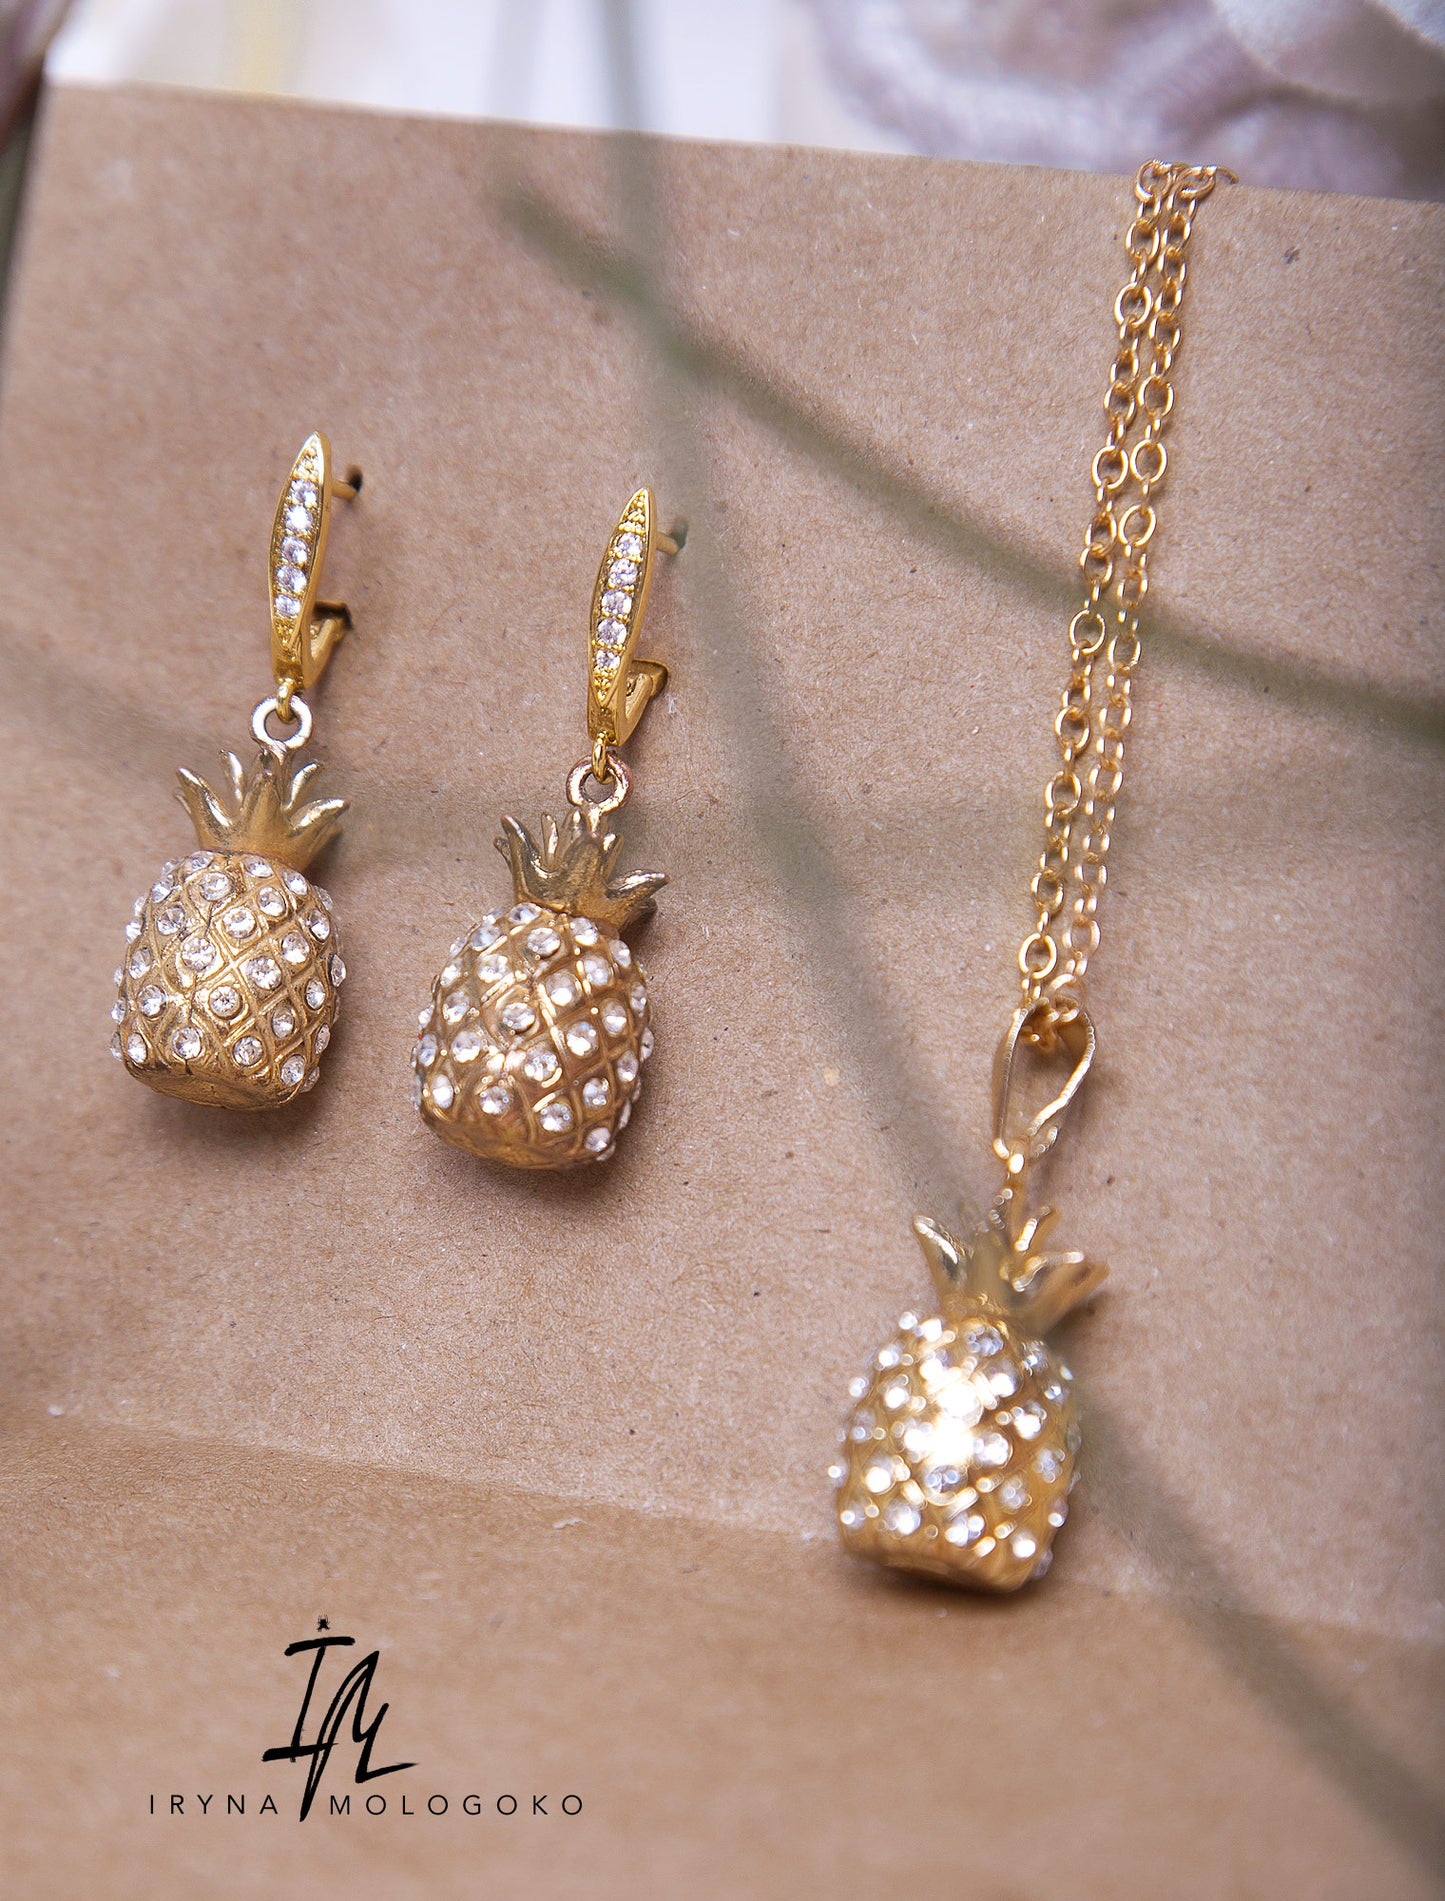 Pineapple Earrings and Necklace Set